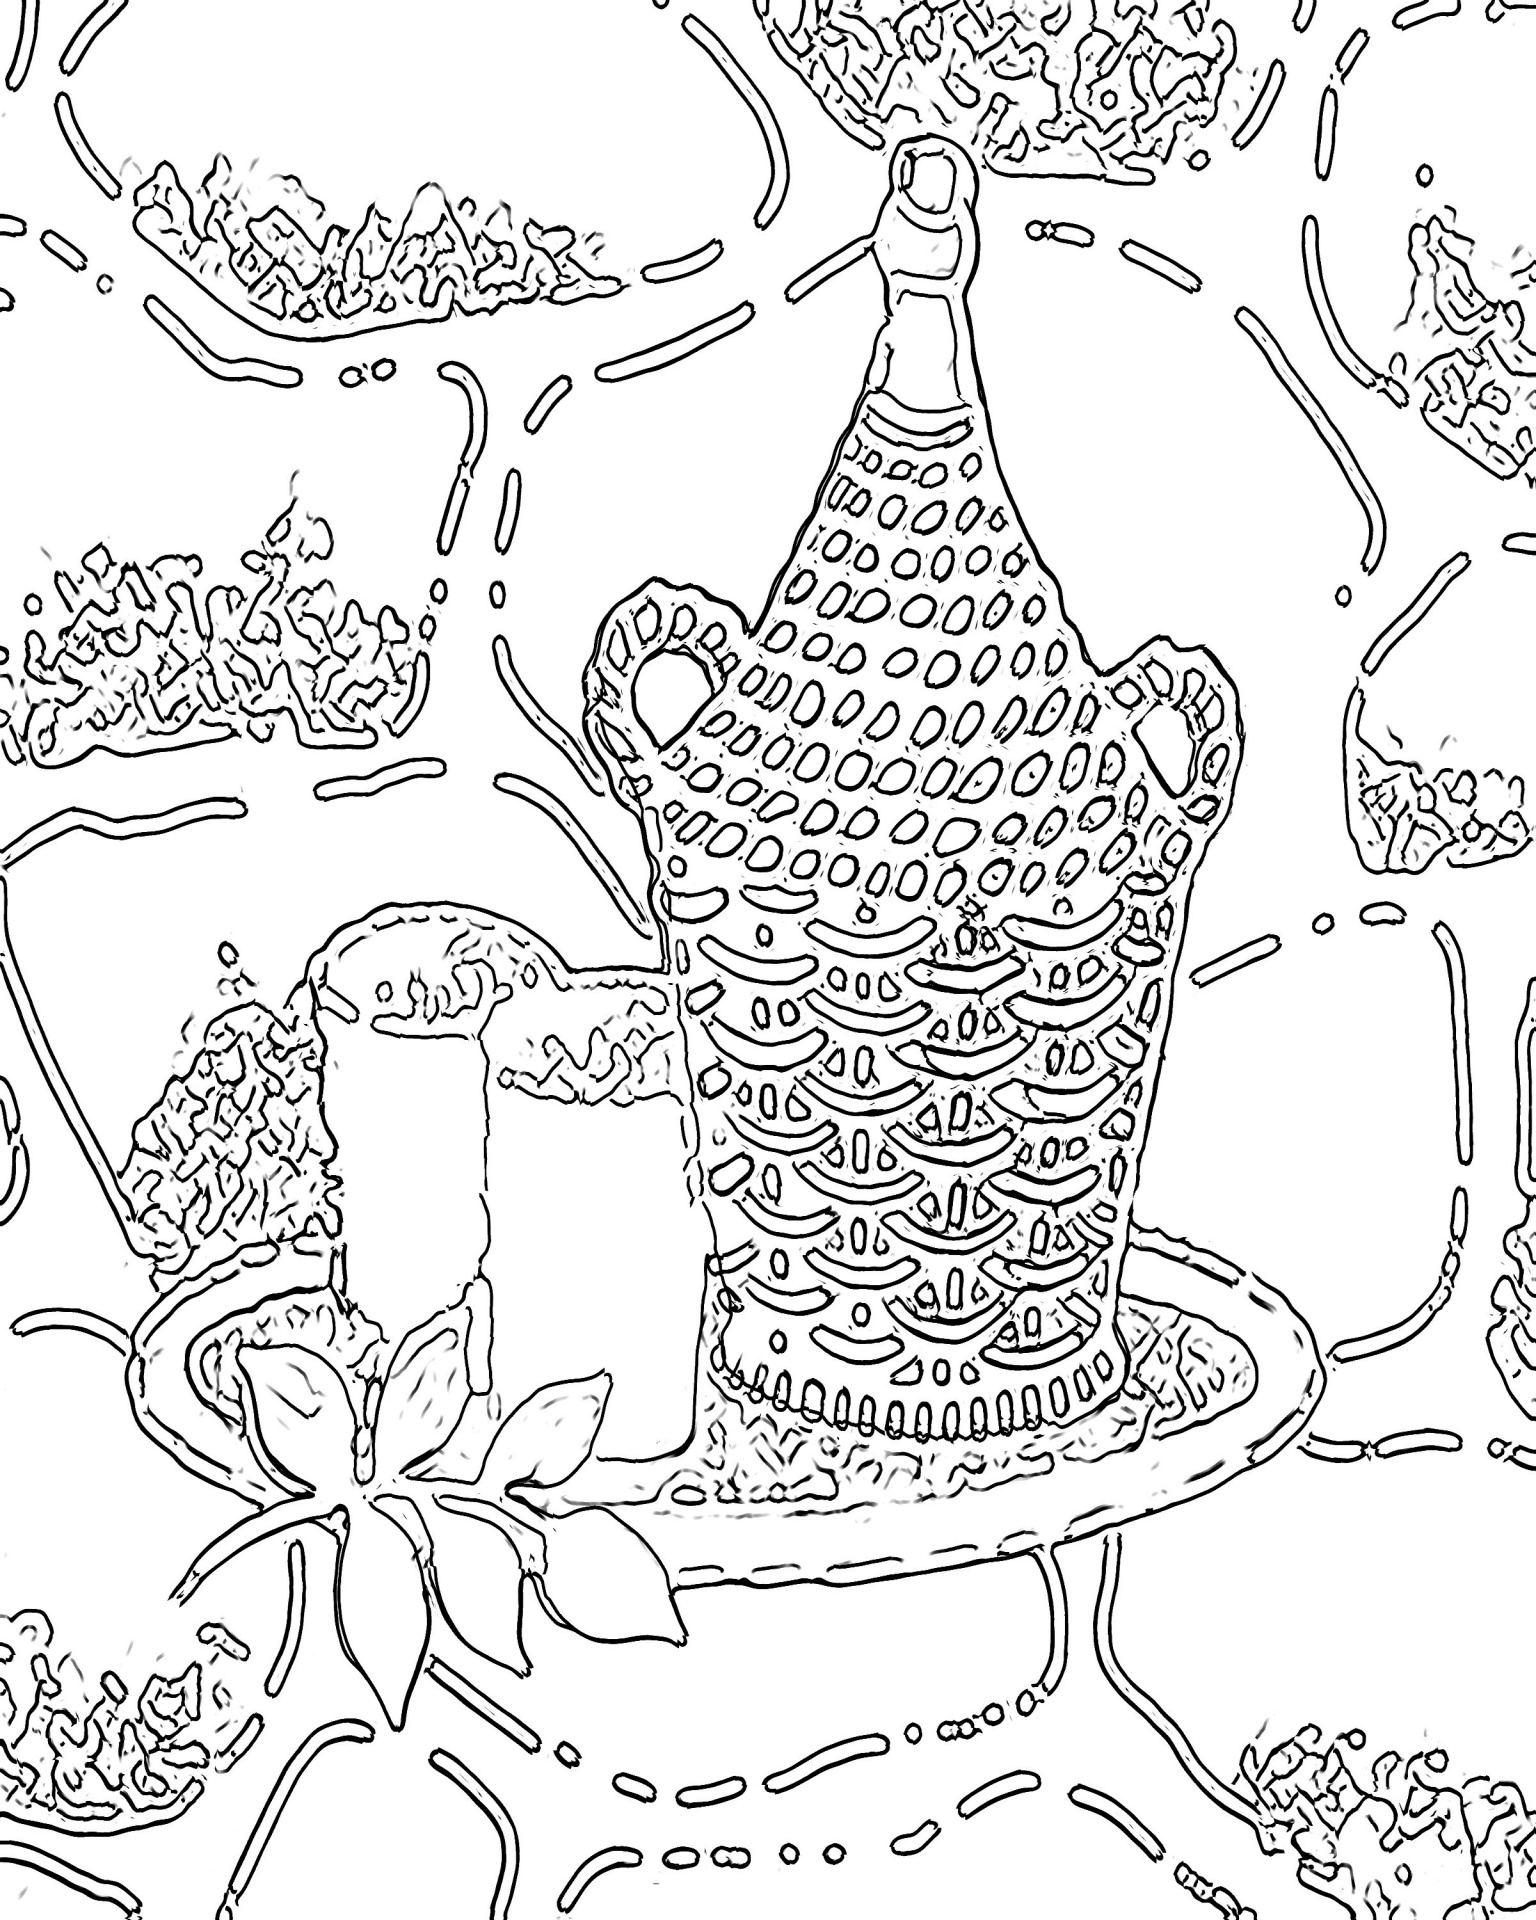 Art Coloring Pages For Adults Free Printable Abstract Coloring Pages For Adults